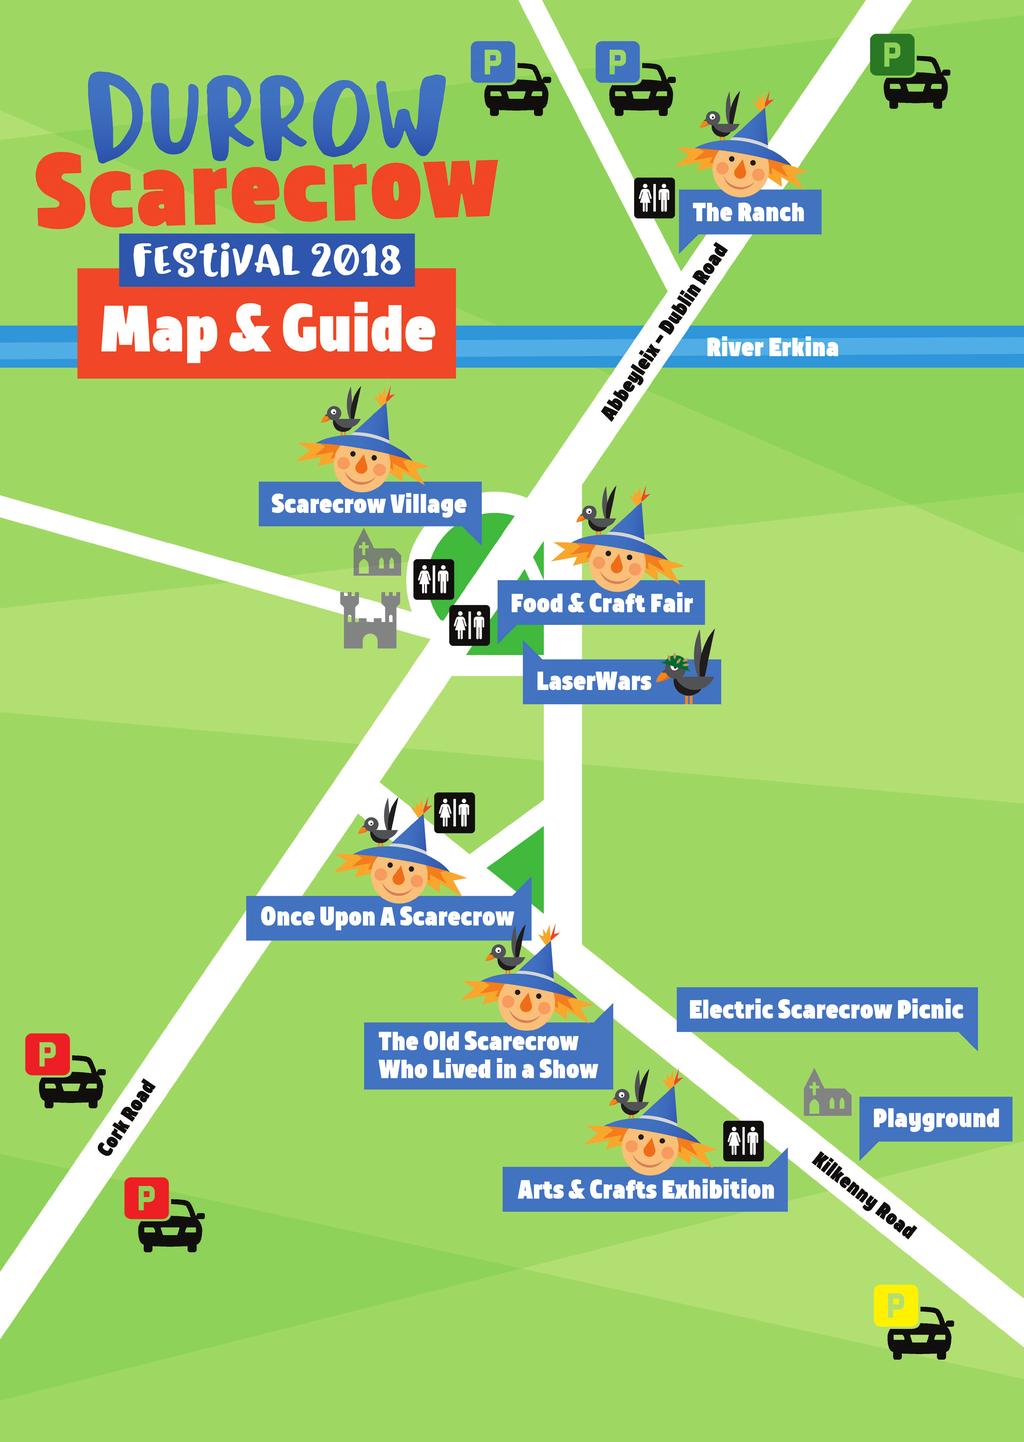 Illegally parked vehicles will be towed Parking is FREE All within easy walking distance of village centre, please use designated car parks PARKING We are a Volunteer run festival, please have